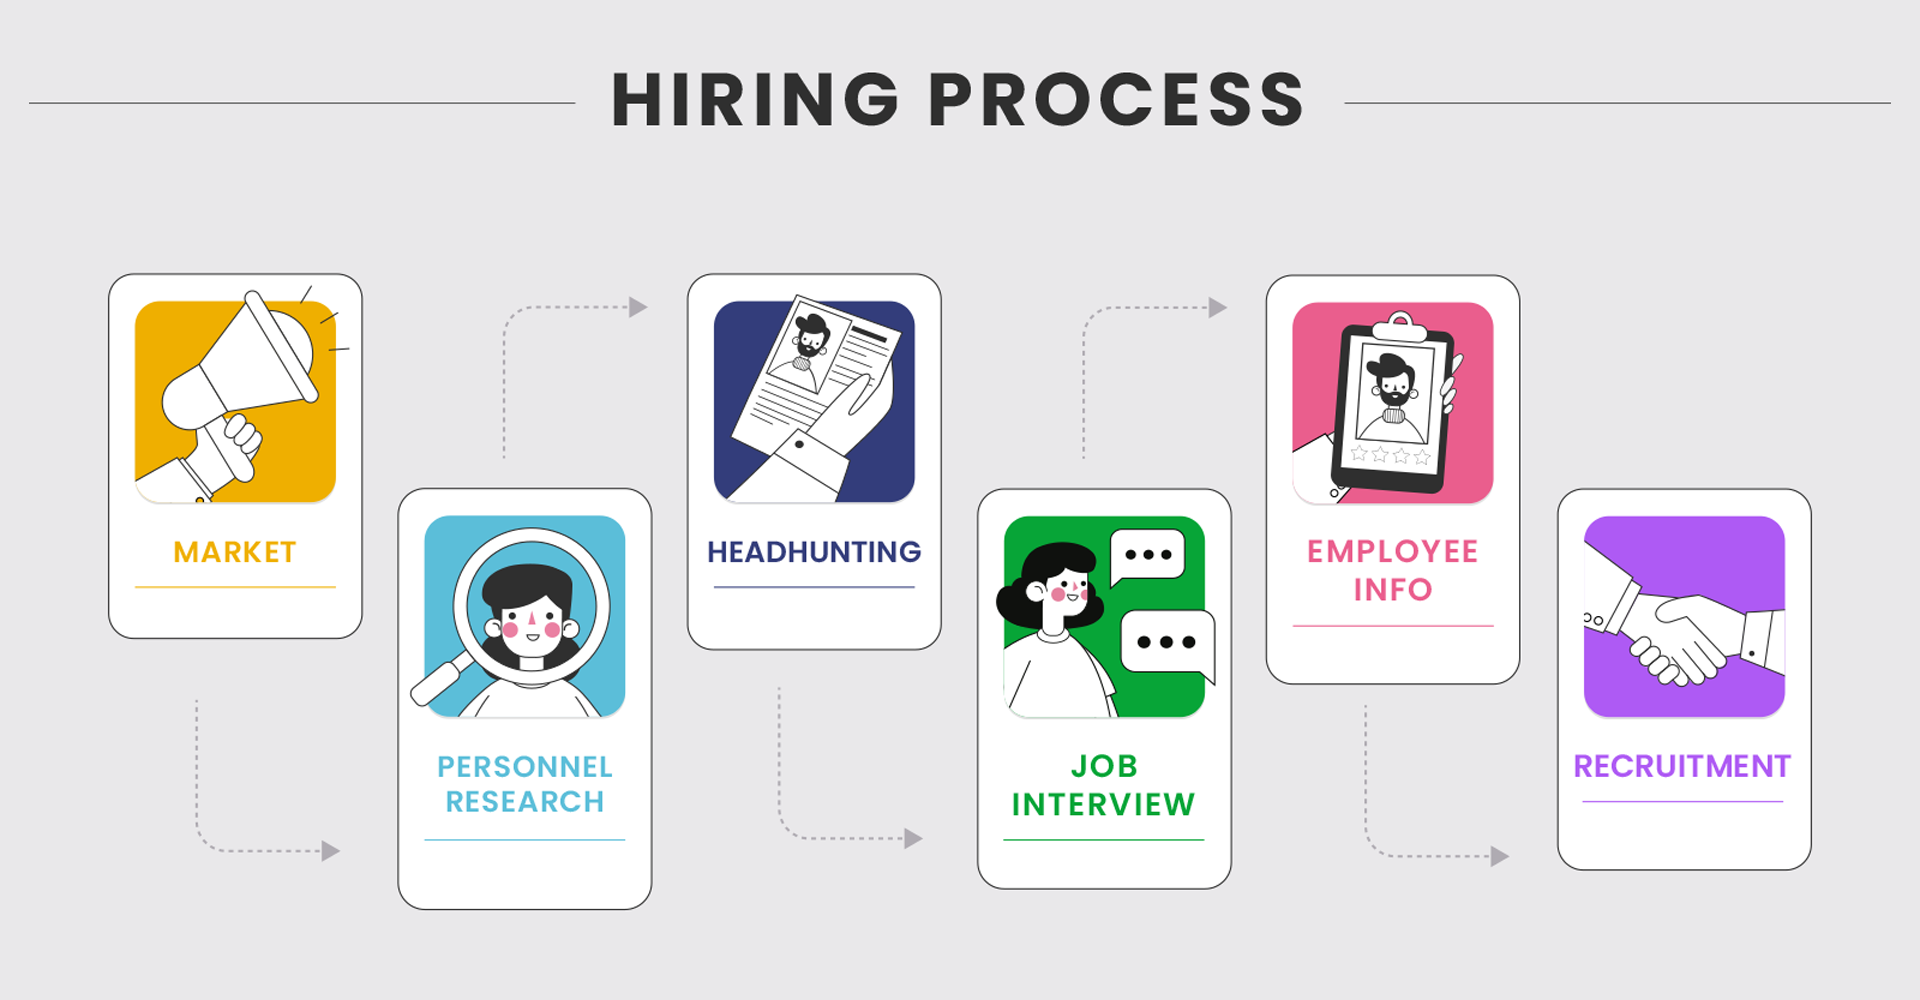 What are the benefits of recruitment automation